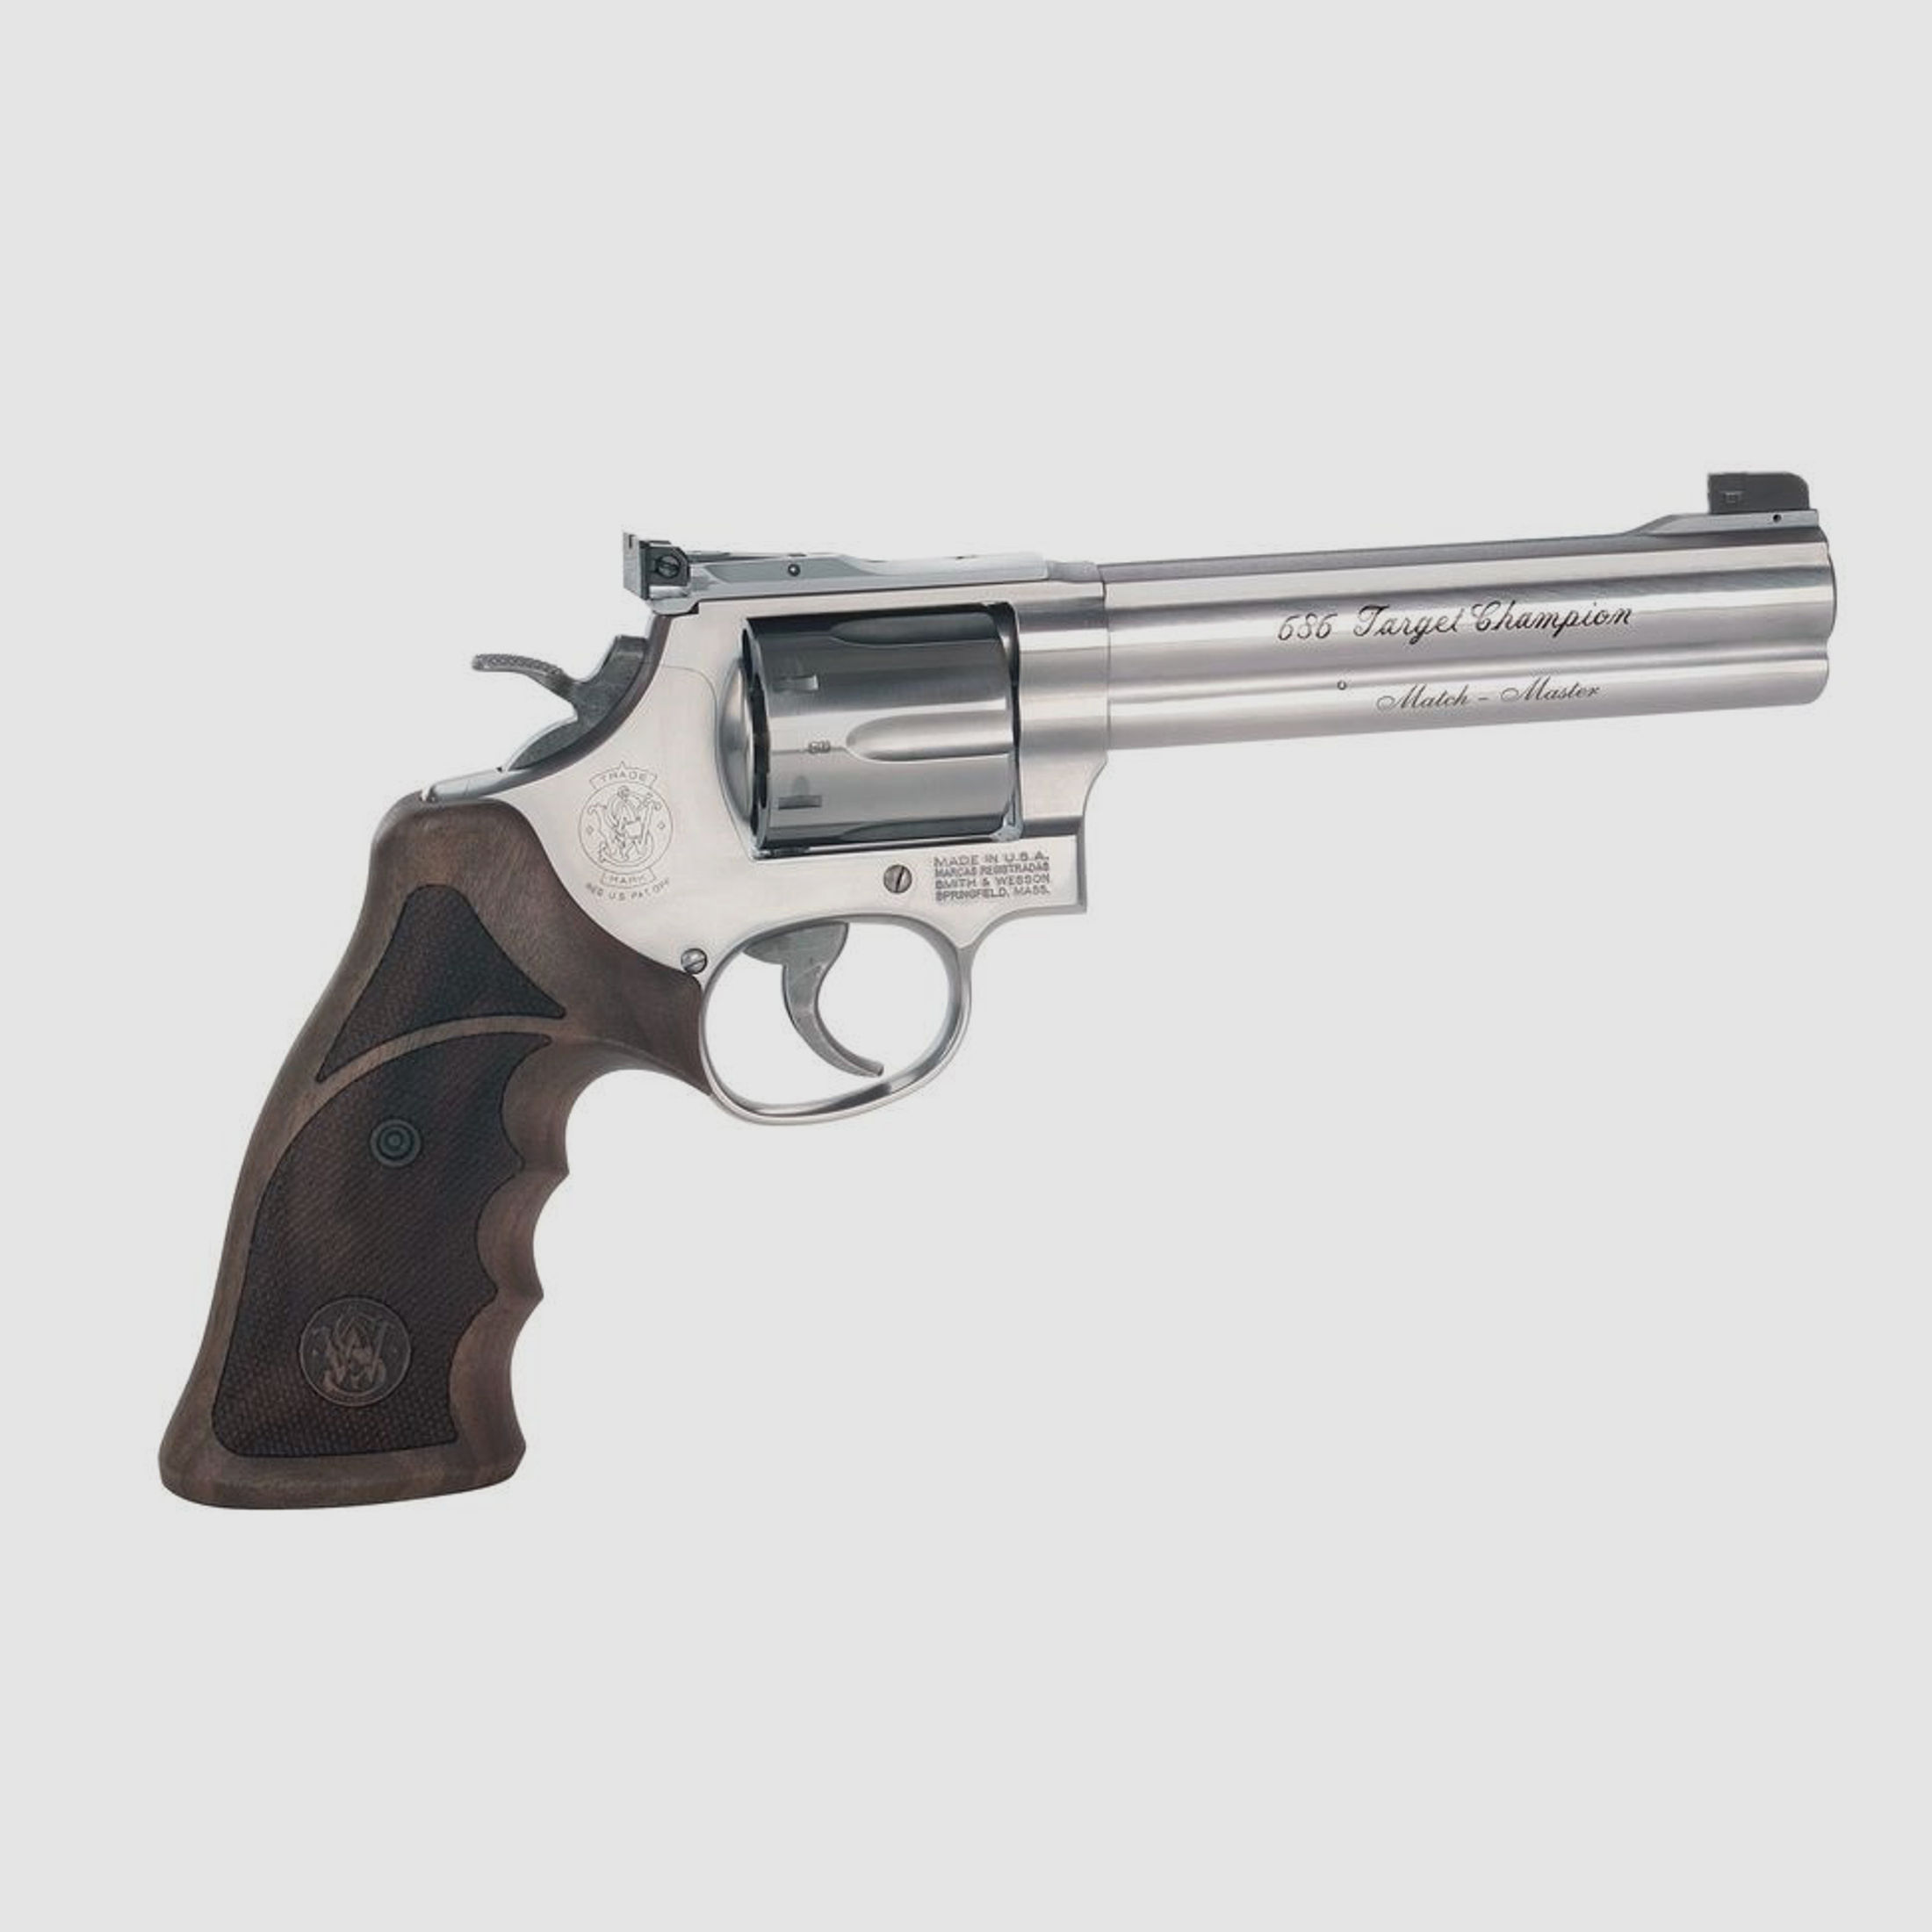 Revolver Smith&Wesson Target Champion Del Match Master .357 Mag. Stainless Steel